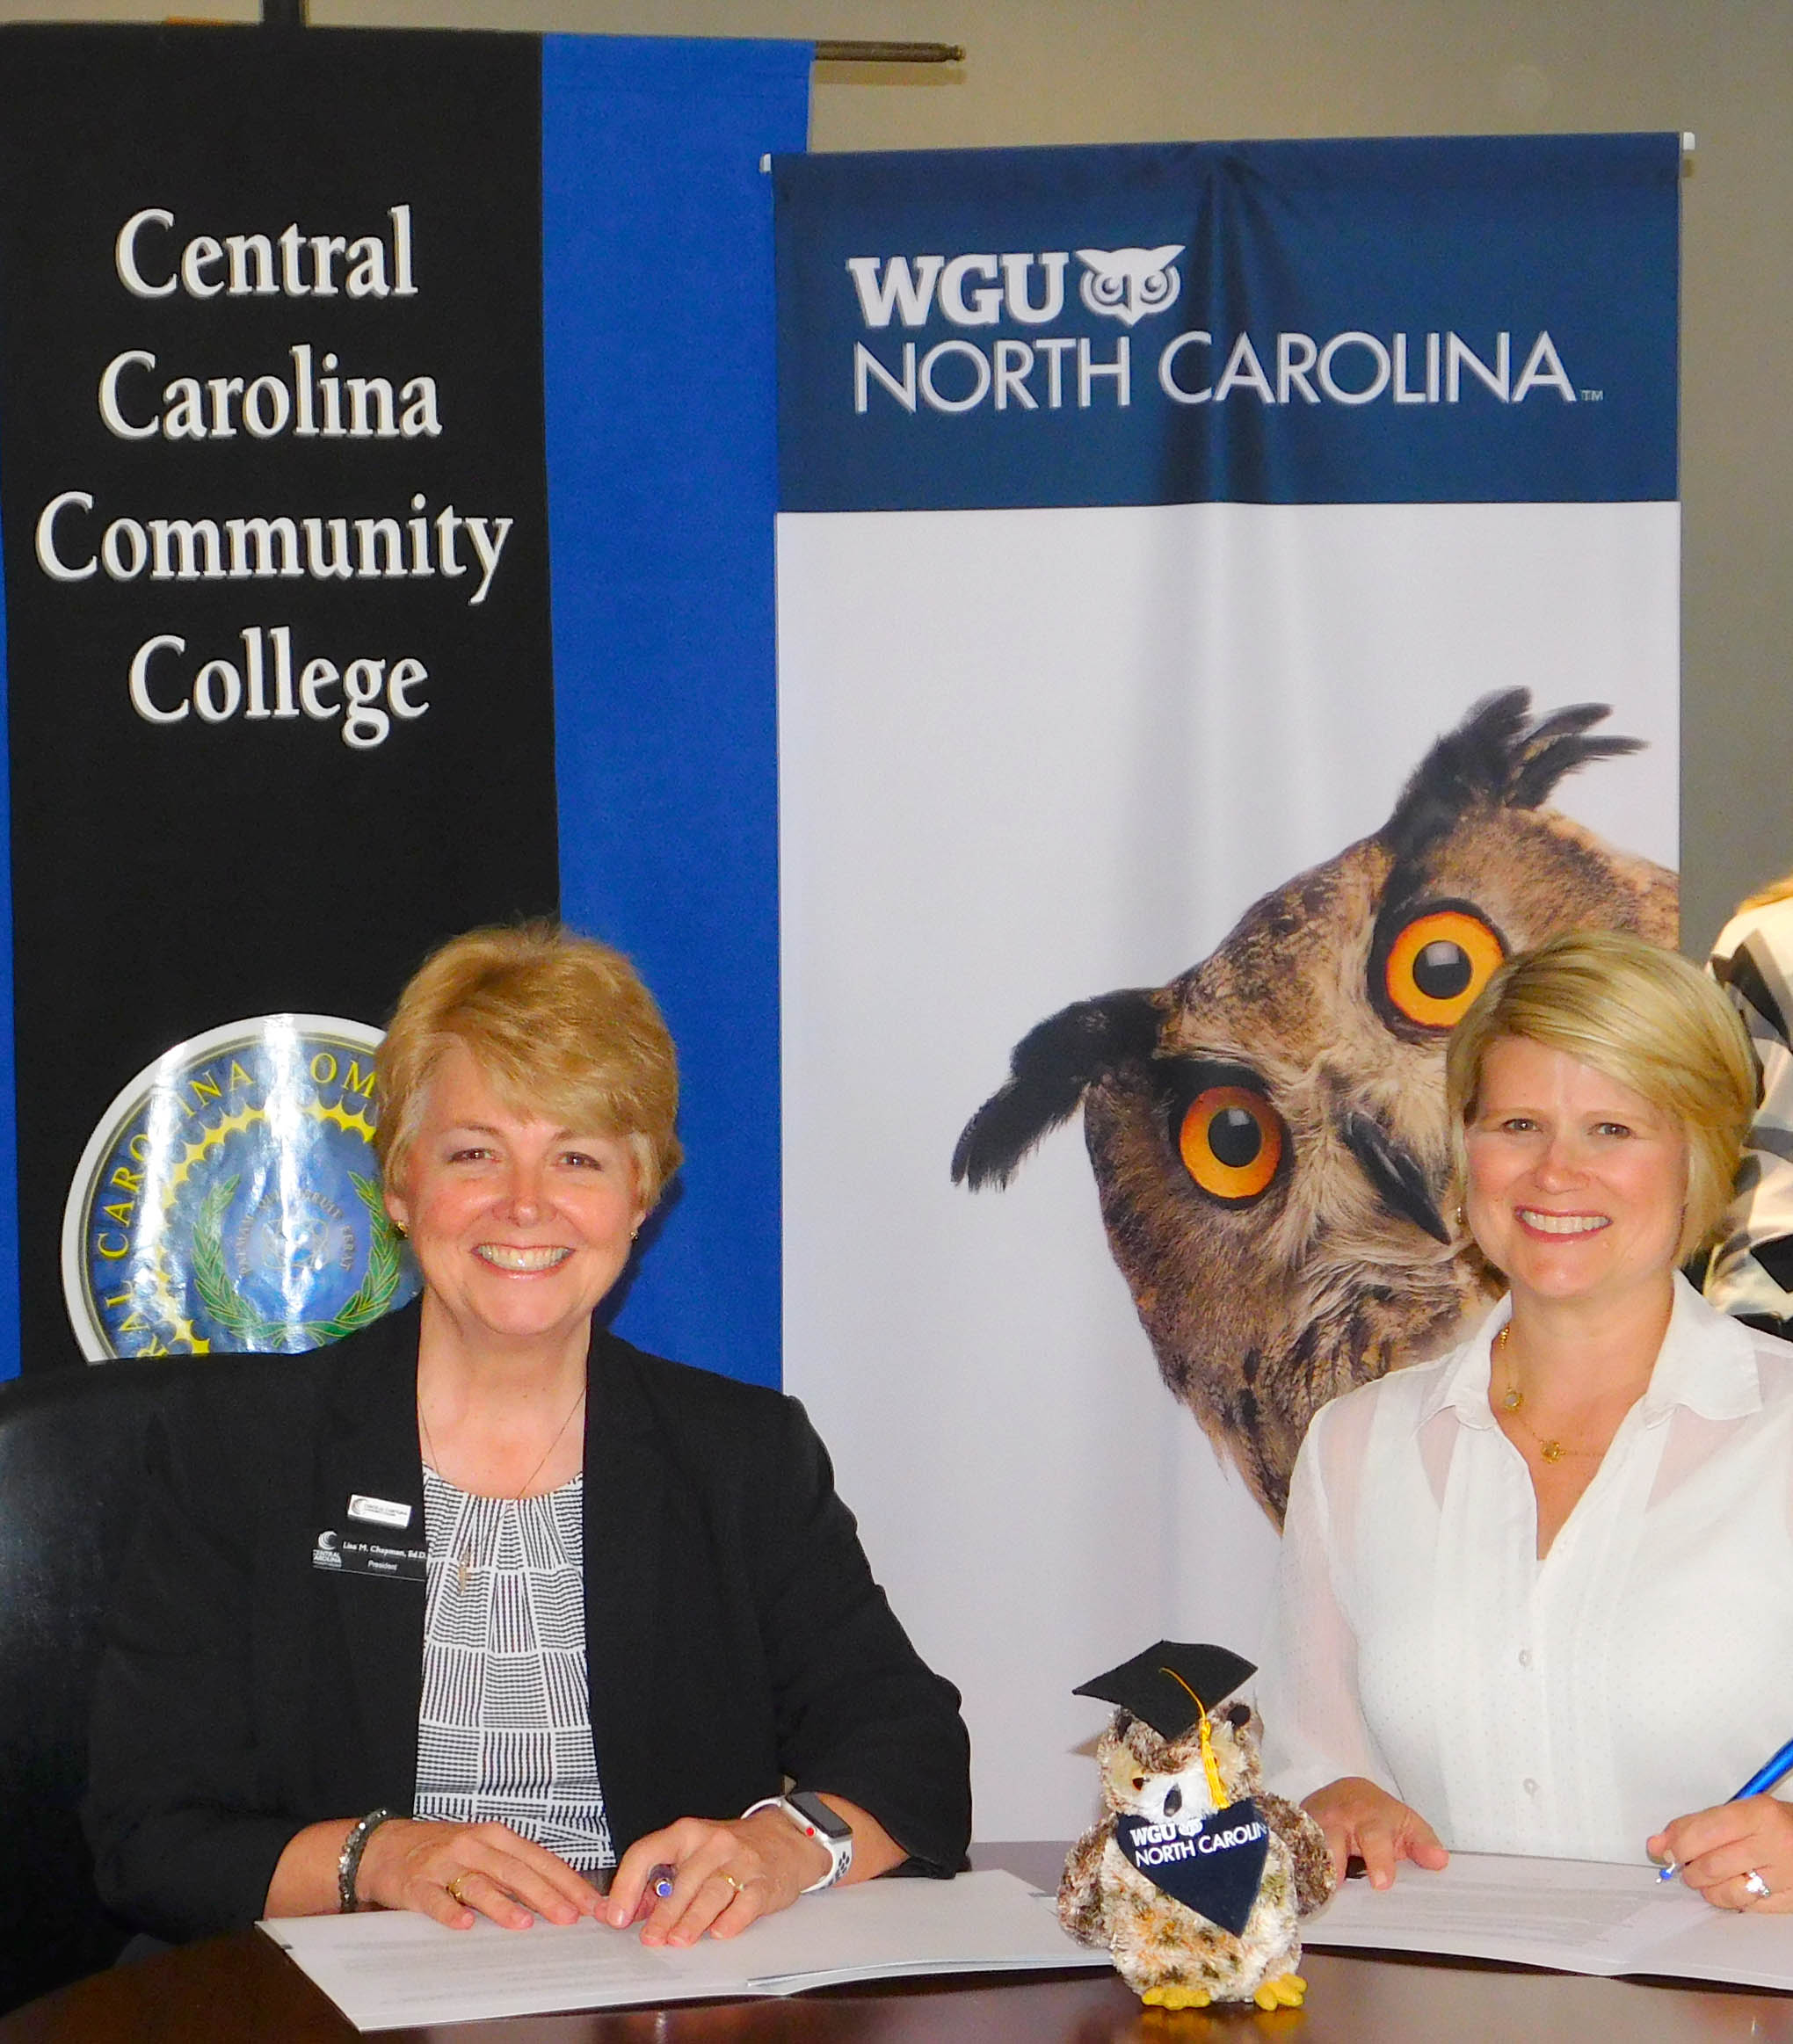 Click to enlarge,  Central Carolina Community College President Dr. Lisa M. Chapman (left) and WGU North Carolina Chancellor Catherine Truitt (right) sign a Memorandum of Understanding that will ease the transition for CCCC graduates to pursue bachelor's degrees offered by WGU, provide tuition discounts, and provide access to scholarship funds.  